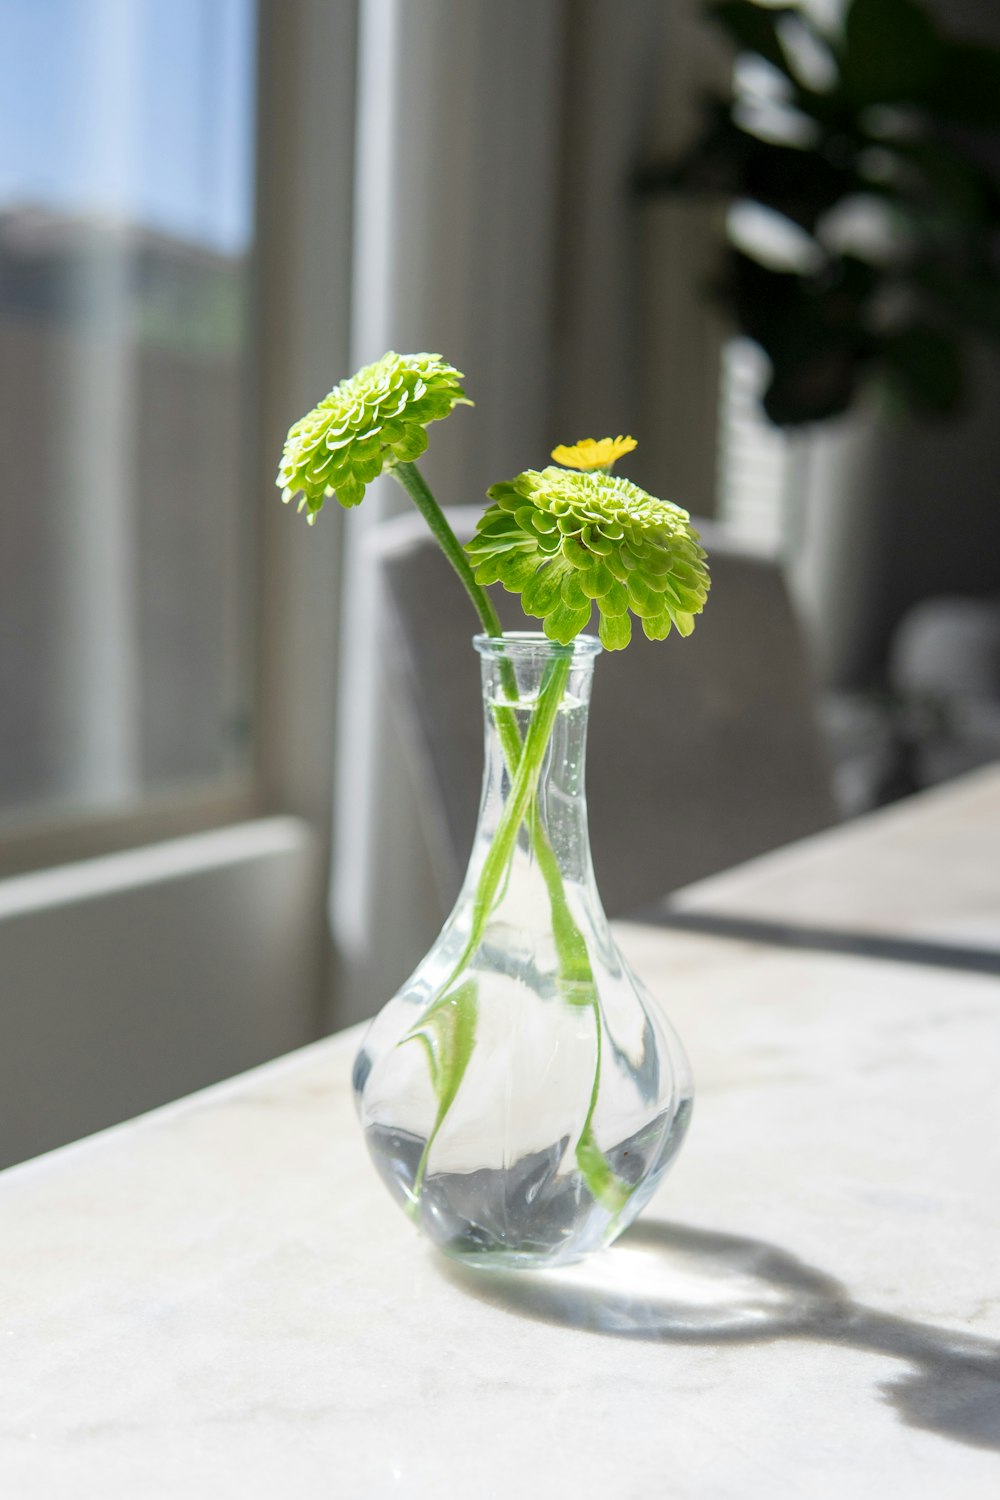 a glass vase filled with green flowers on a table